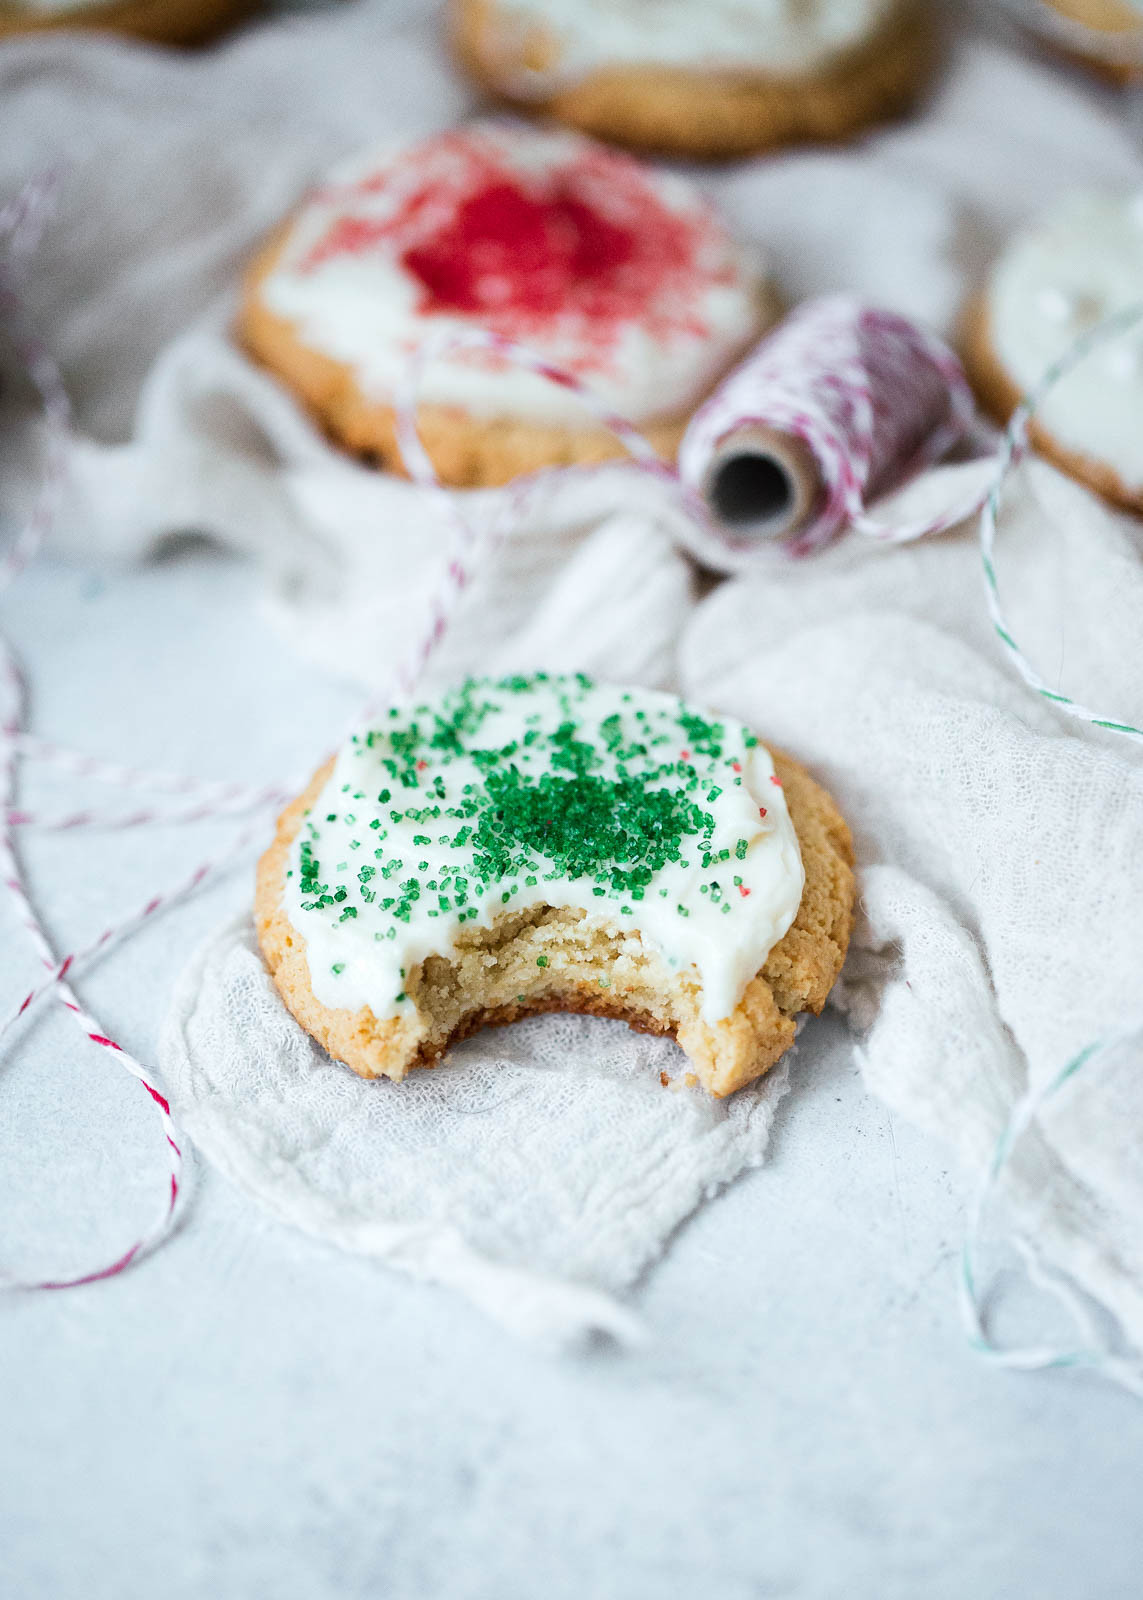 Sugar Cookies Without Flour
 Soft Almond Flour Sugar Cookies with Vanilla Buttercream